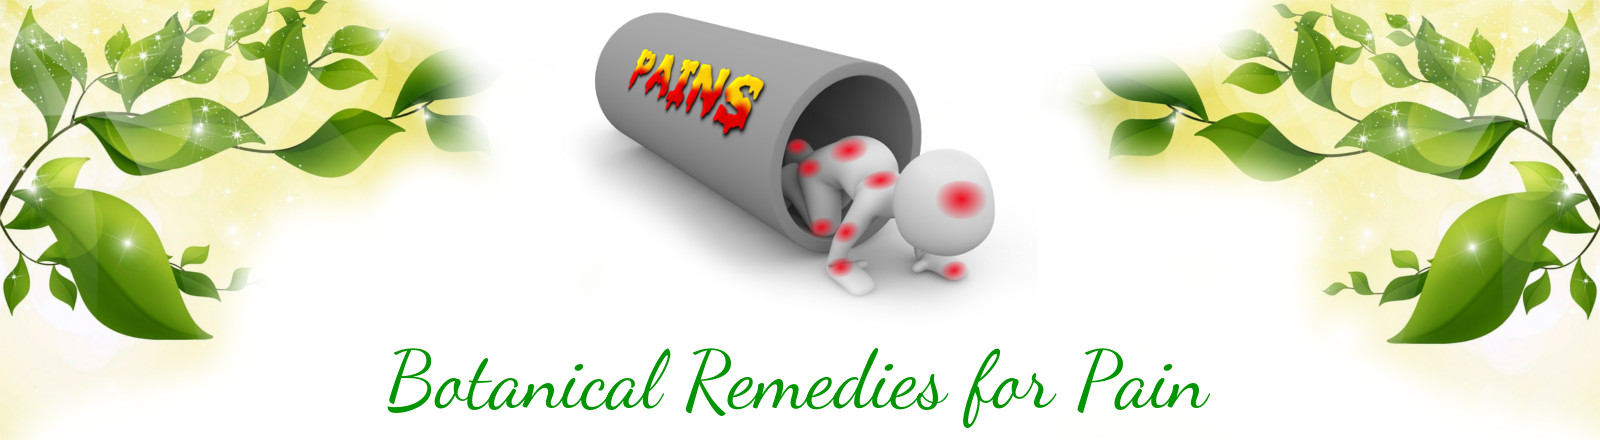 botanical remedies for pain